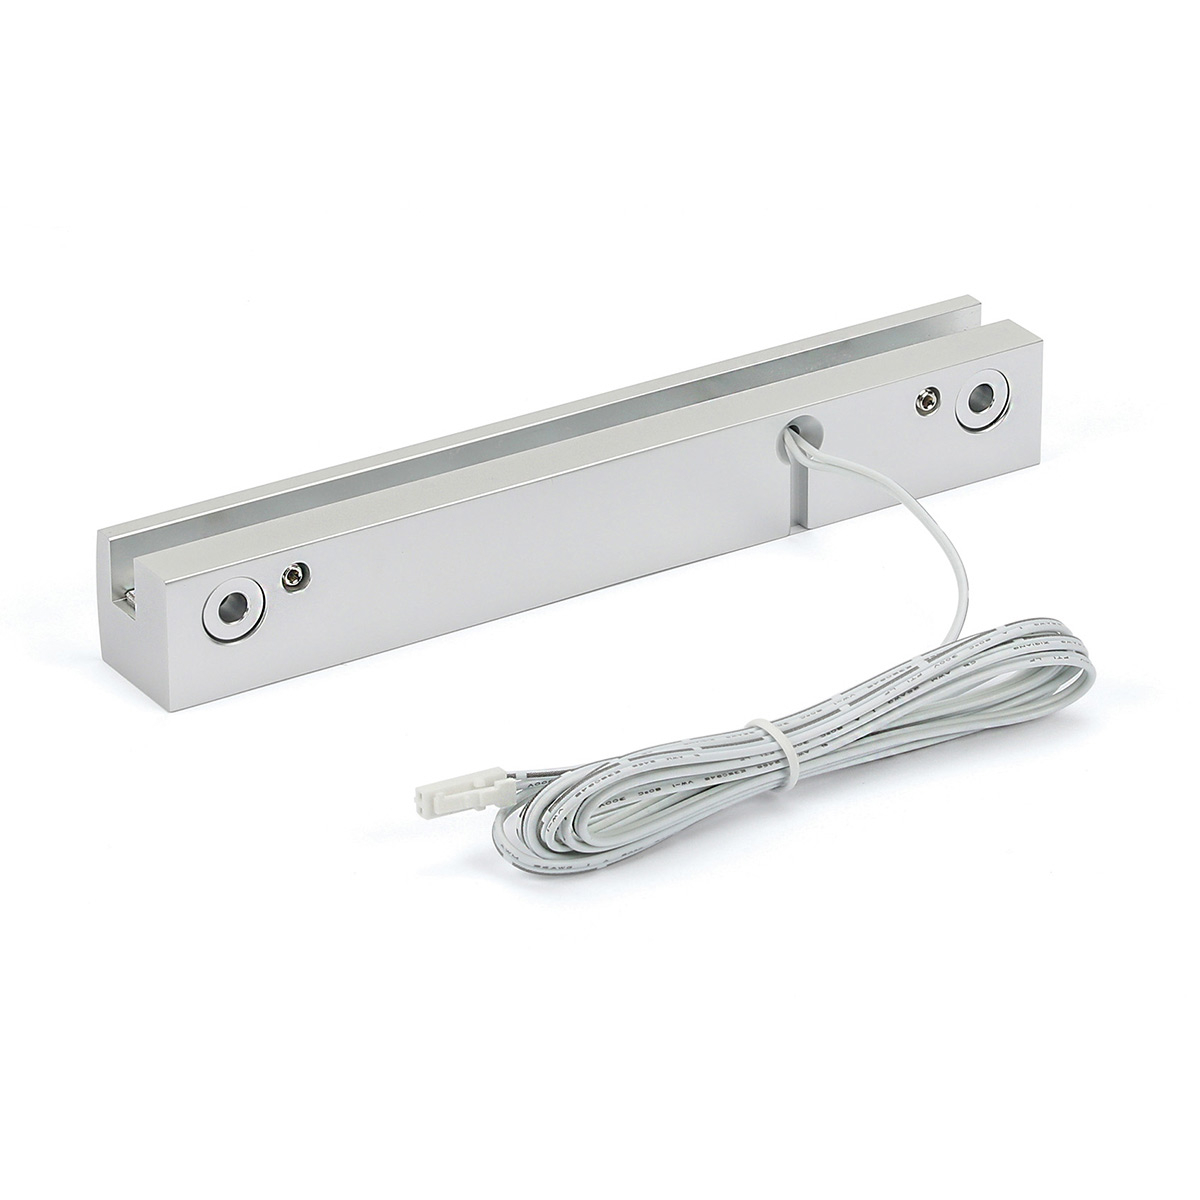 RED LED Sign Clamp in 14 15/16'' (380 mm) length X 1'' (25.4 mm) Silver satin aluminum finish.Mount Kit Supports Signs Up To 5/16'' Thick, Wall Mount, Low Voltage transformer included.